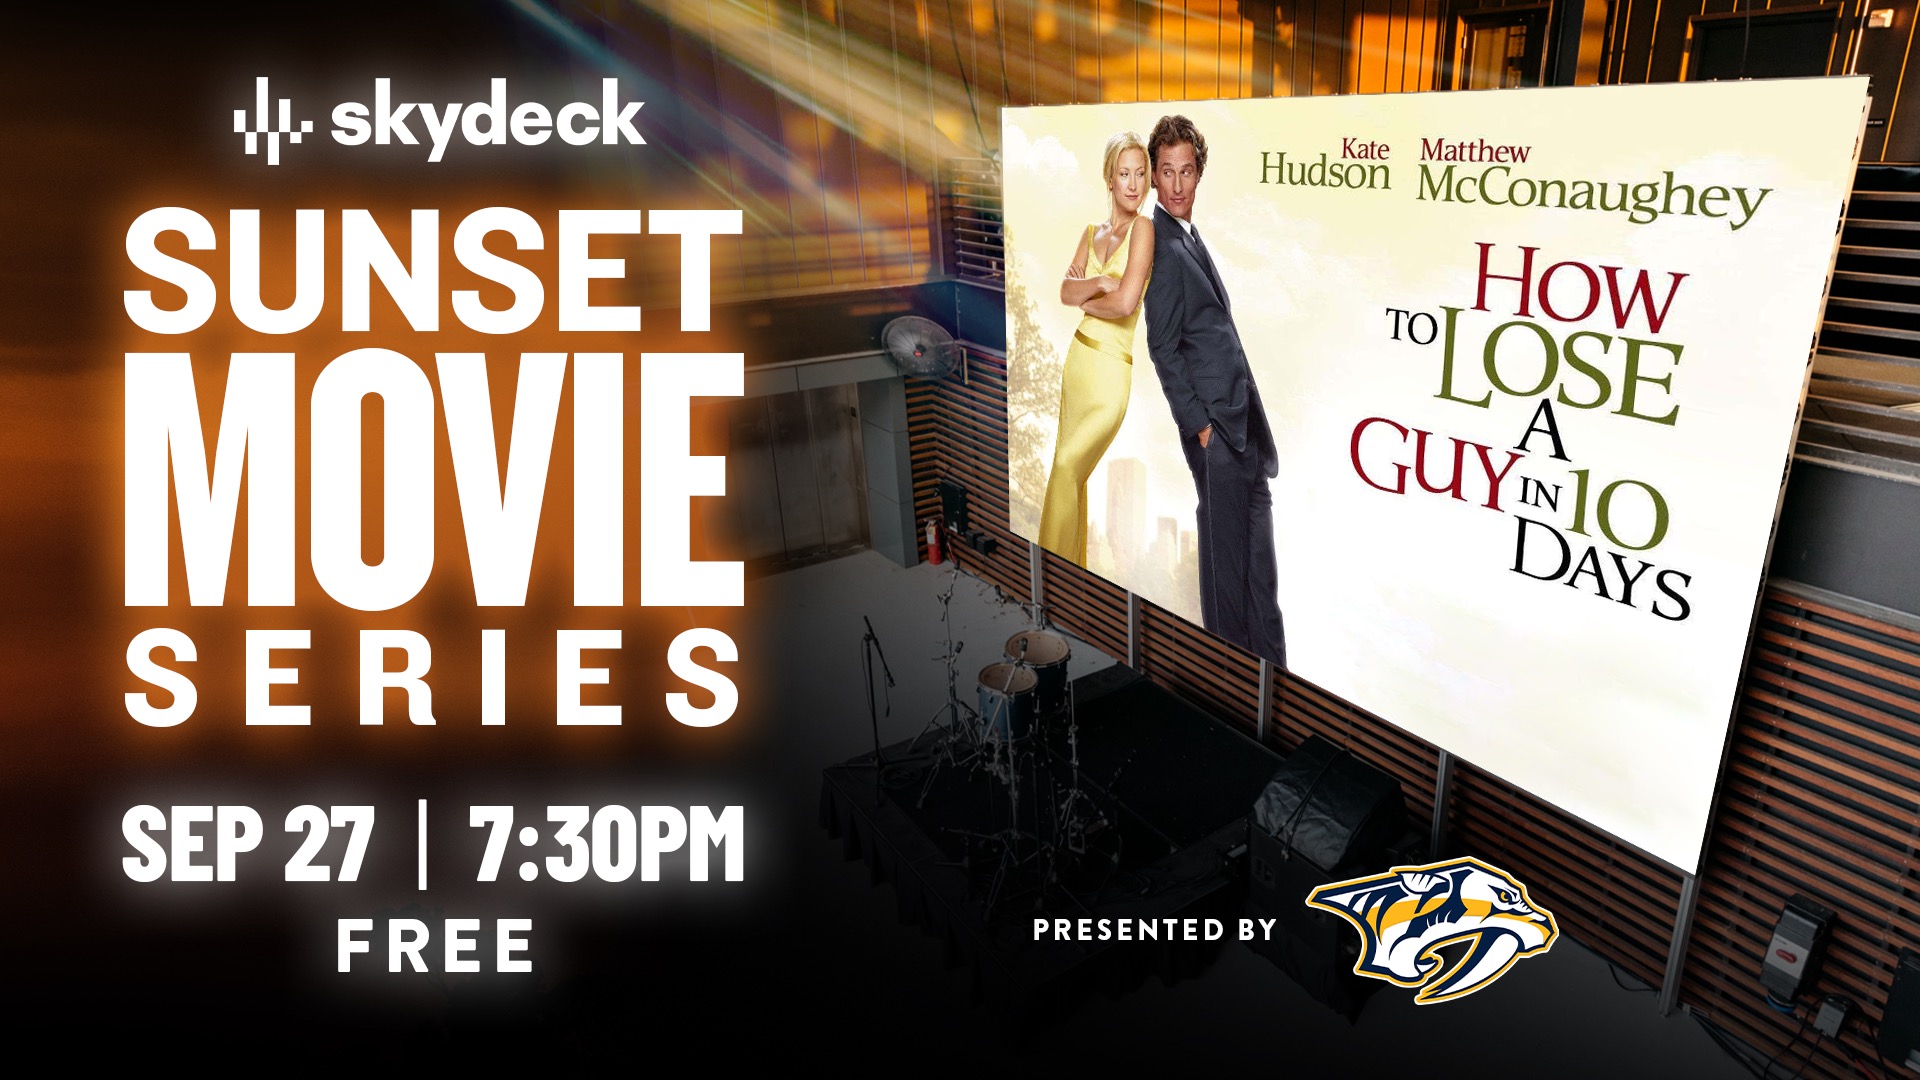 Sunset Movie Series presented by The Nashville Predators | How To Lose A Guy In 10 Days - hero